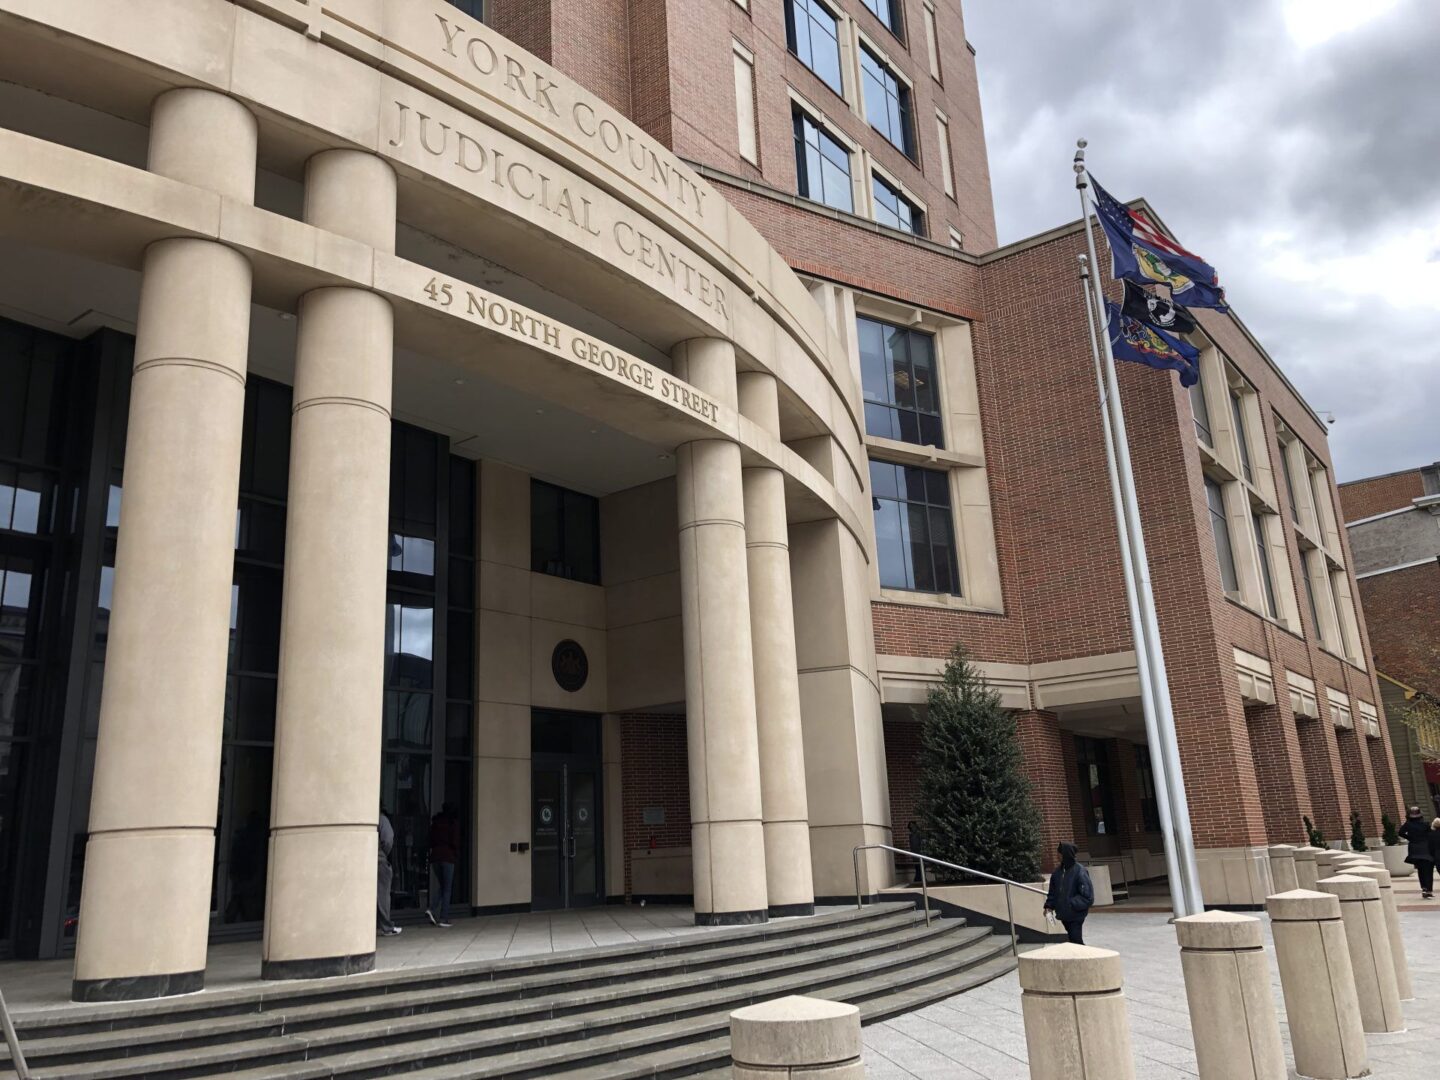 Attorneys for Spotlight PA and four other state newsrooms alleged the York County Clerk of Courts delayed access to, improperly restricted, and overcharged for judicial records.